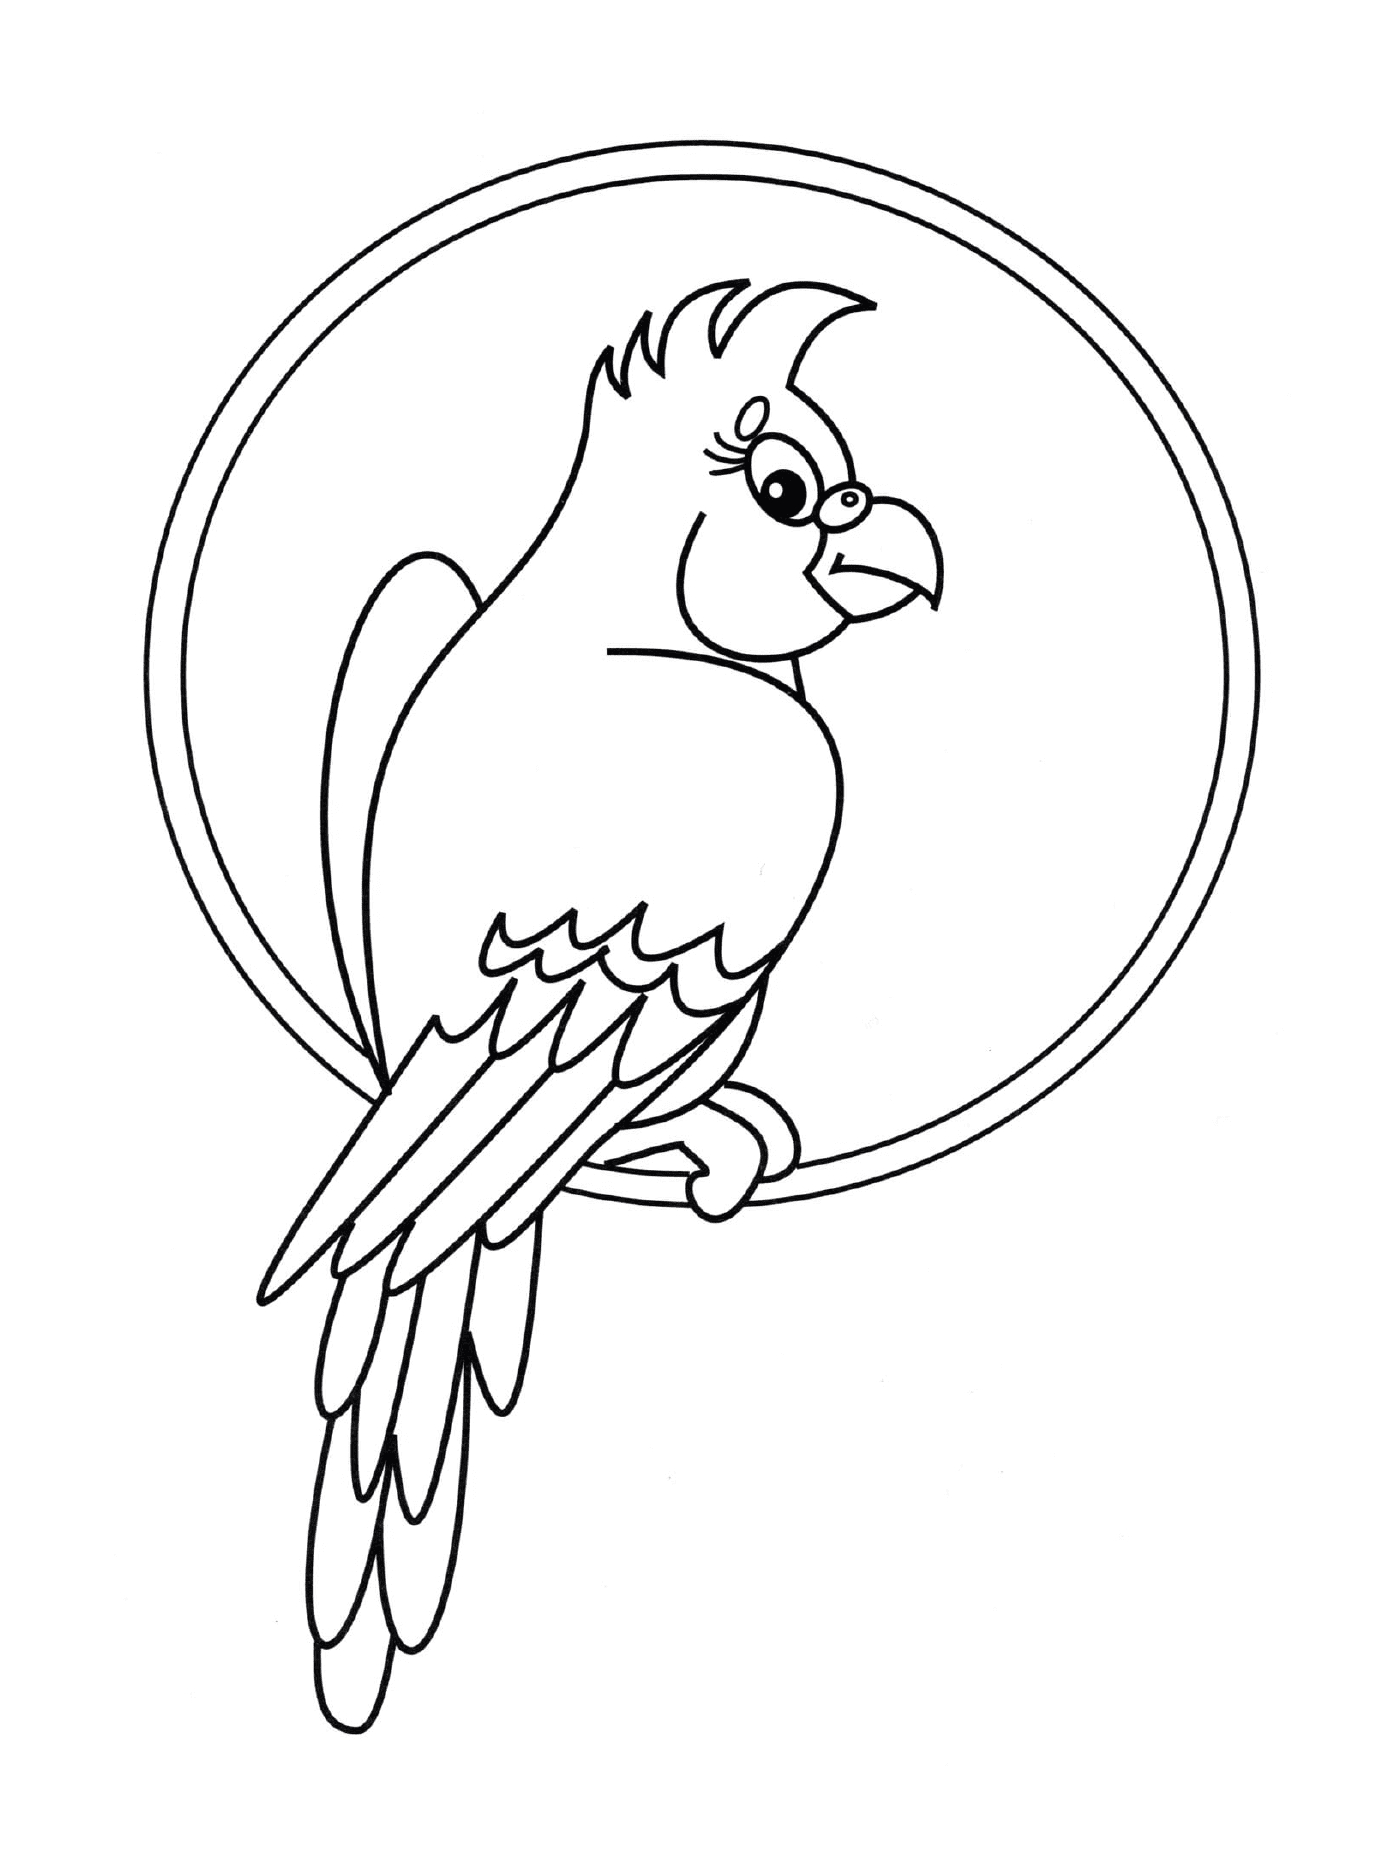  Parrot sitting on a circle 